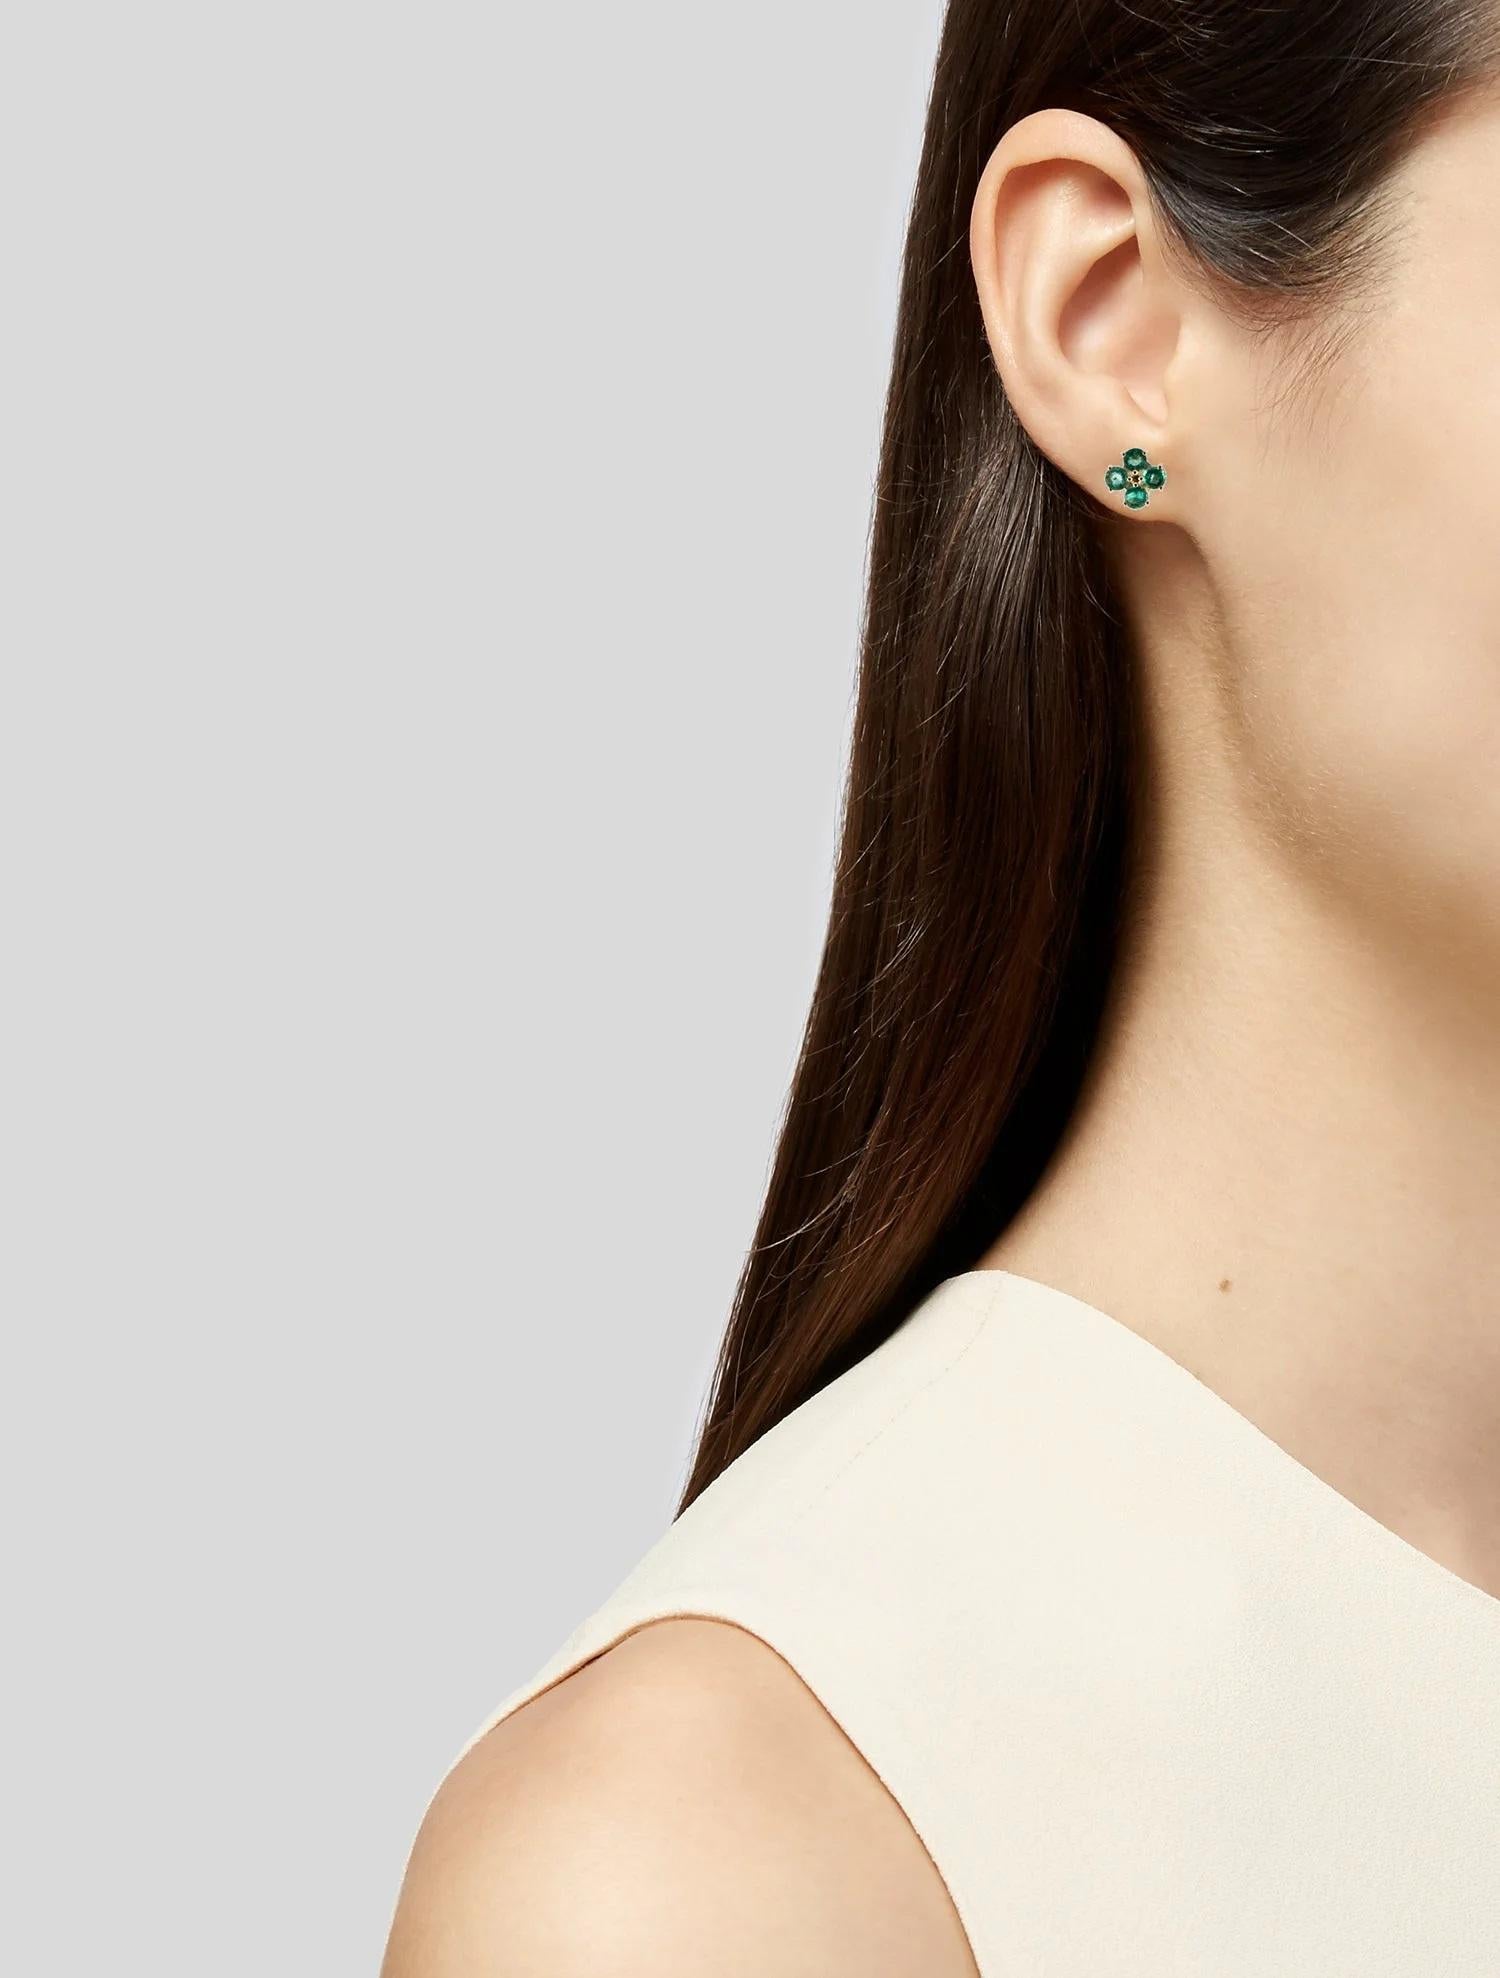 Elevate your jewelry collection with these exquisite 14K yellow gold emerald stud earrings. Each earring features a dazzling round faceted emerald, totaling 1.97 carats. The vibrant green hue of the emeralds adds a touch of sophistication and